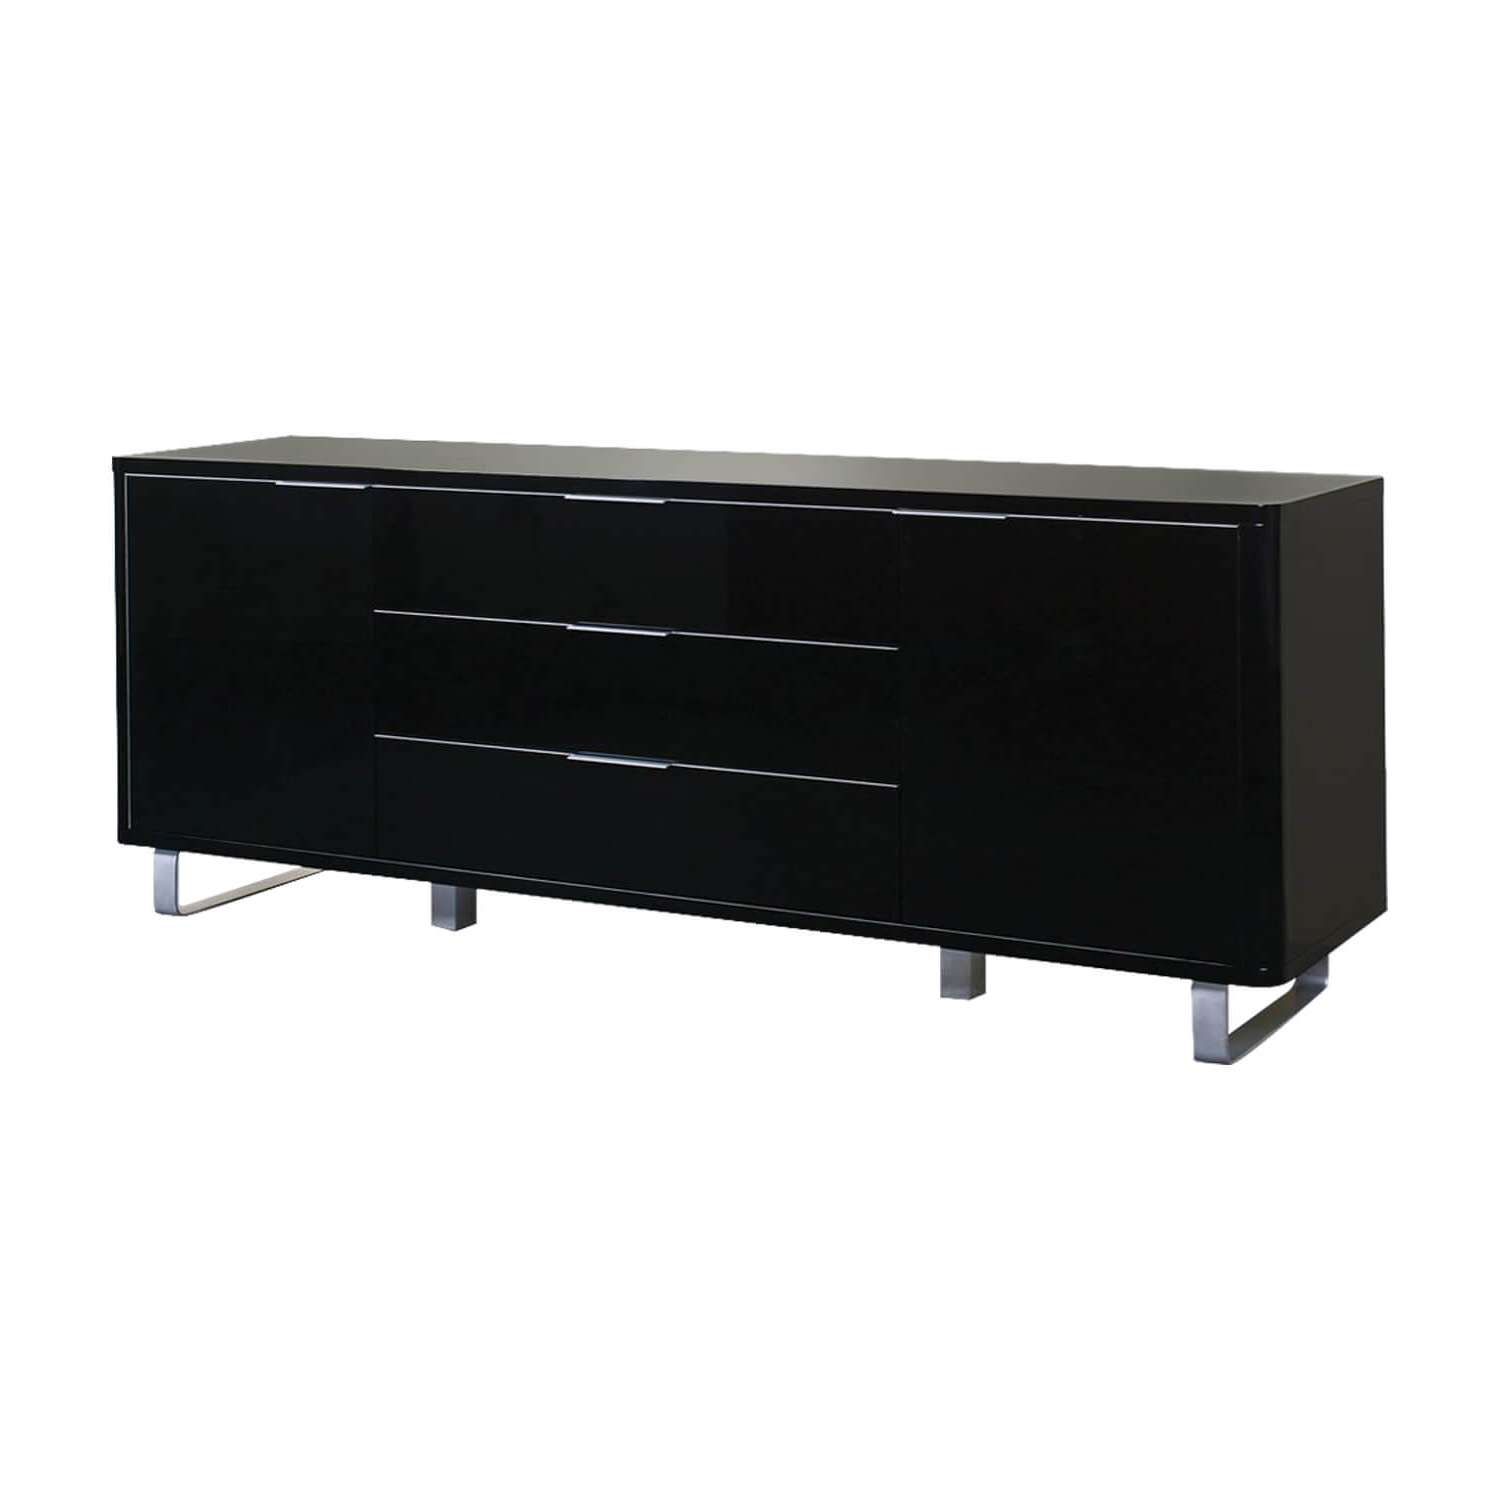 Accent Black High Gloss Sideboard | Modern Dining Furniture | Fads In Uk Gloss Sideboards (Gallery 20 of 20)